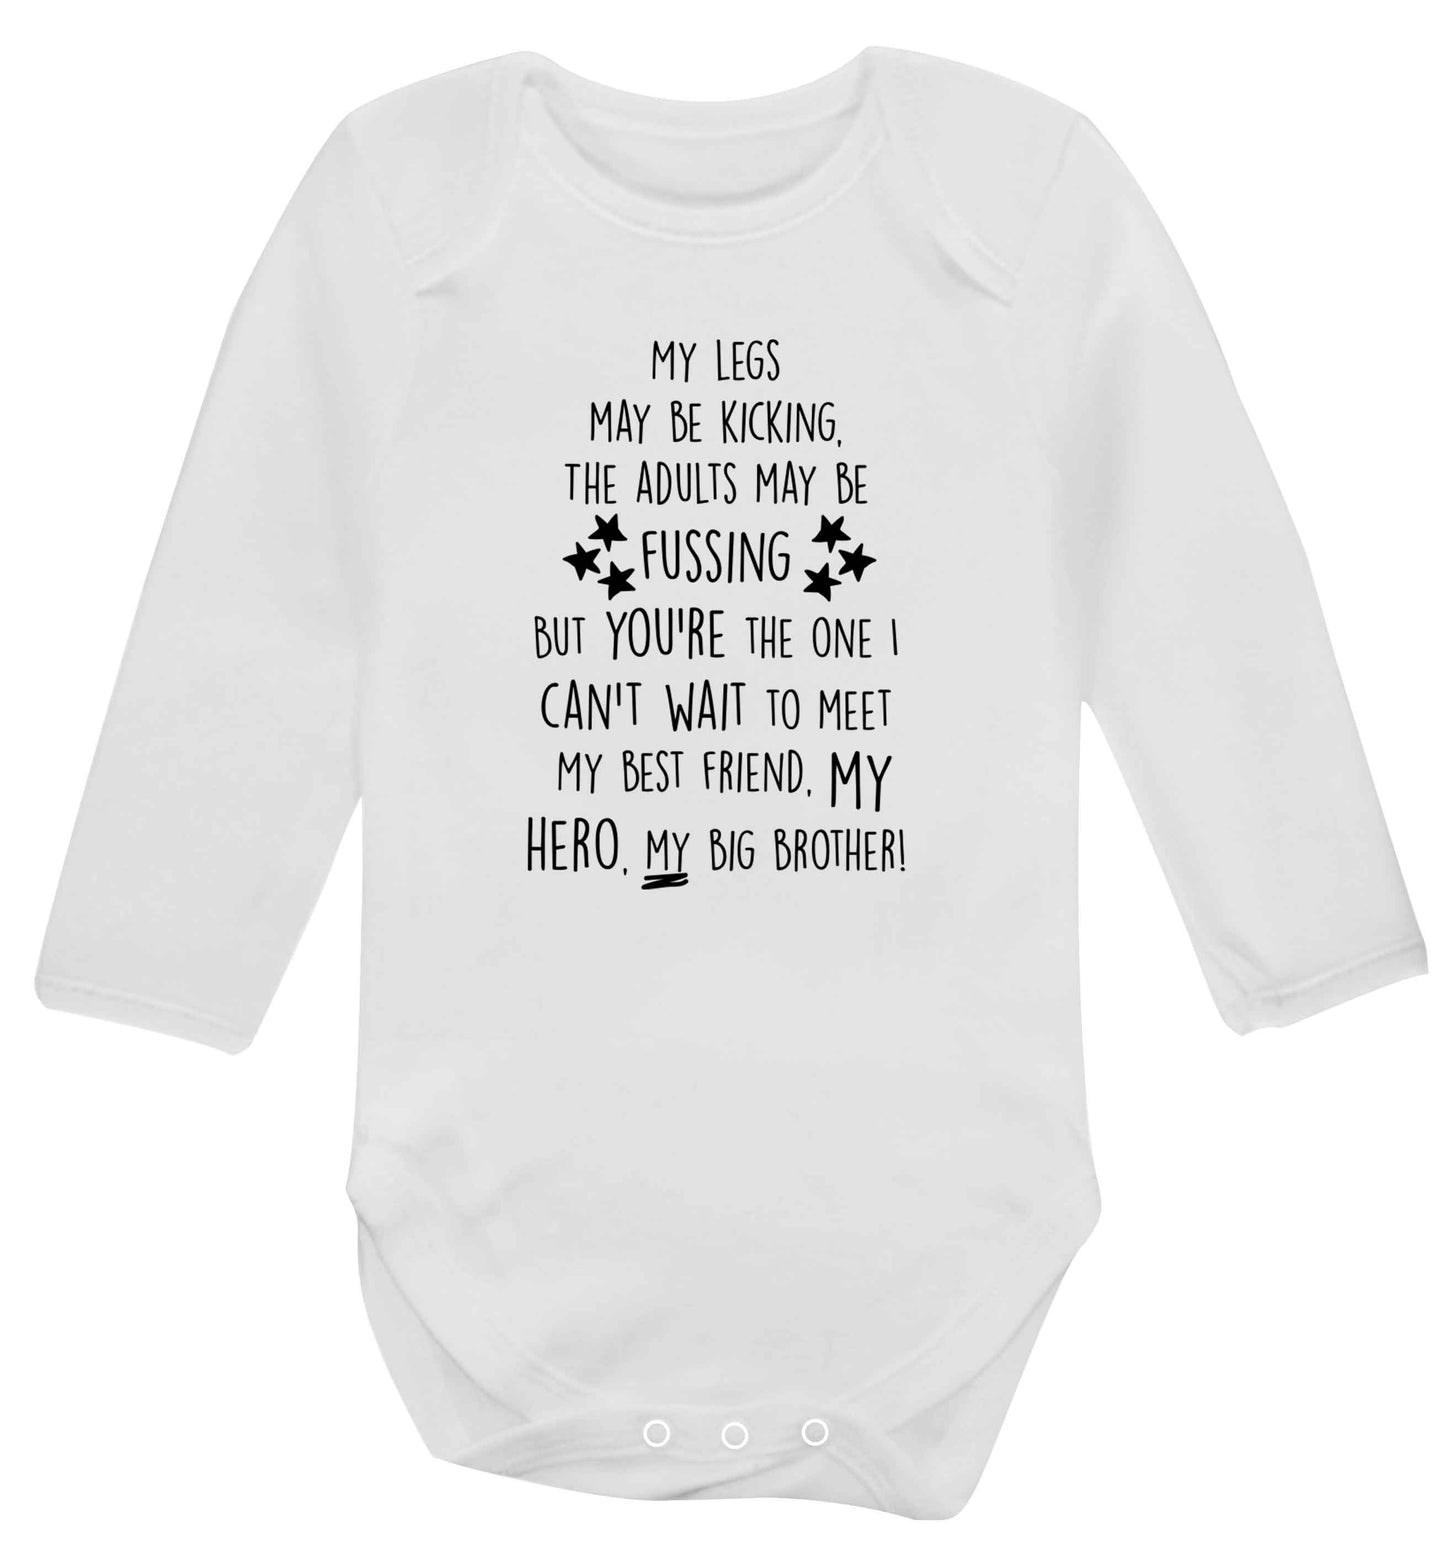 A poem from bump to big brother Baby Vest long sleeved white 6-12 months